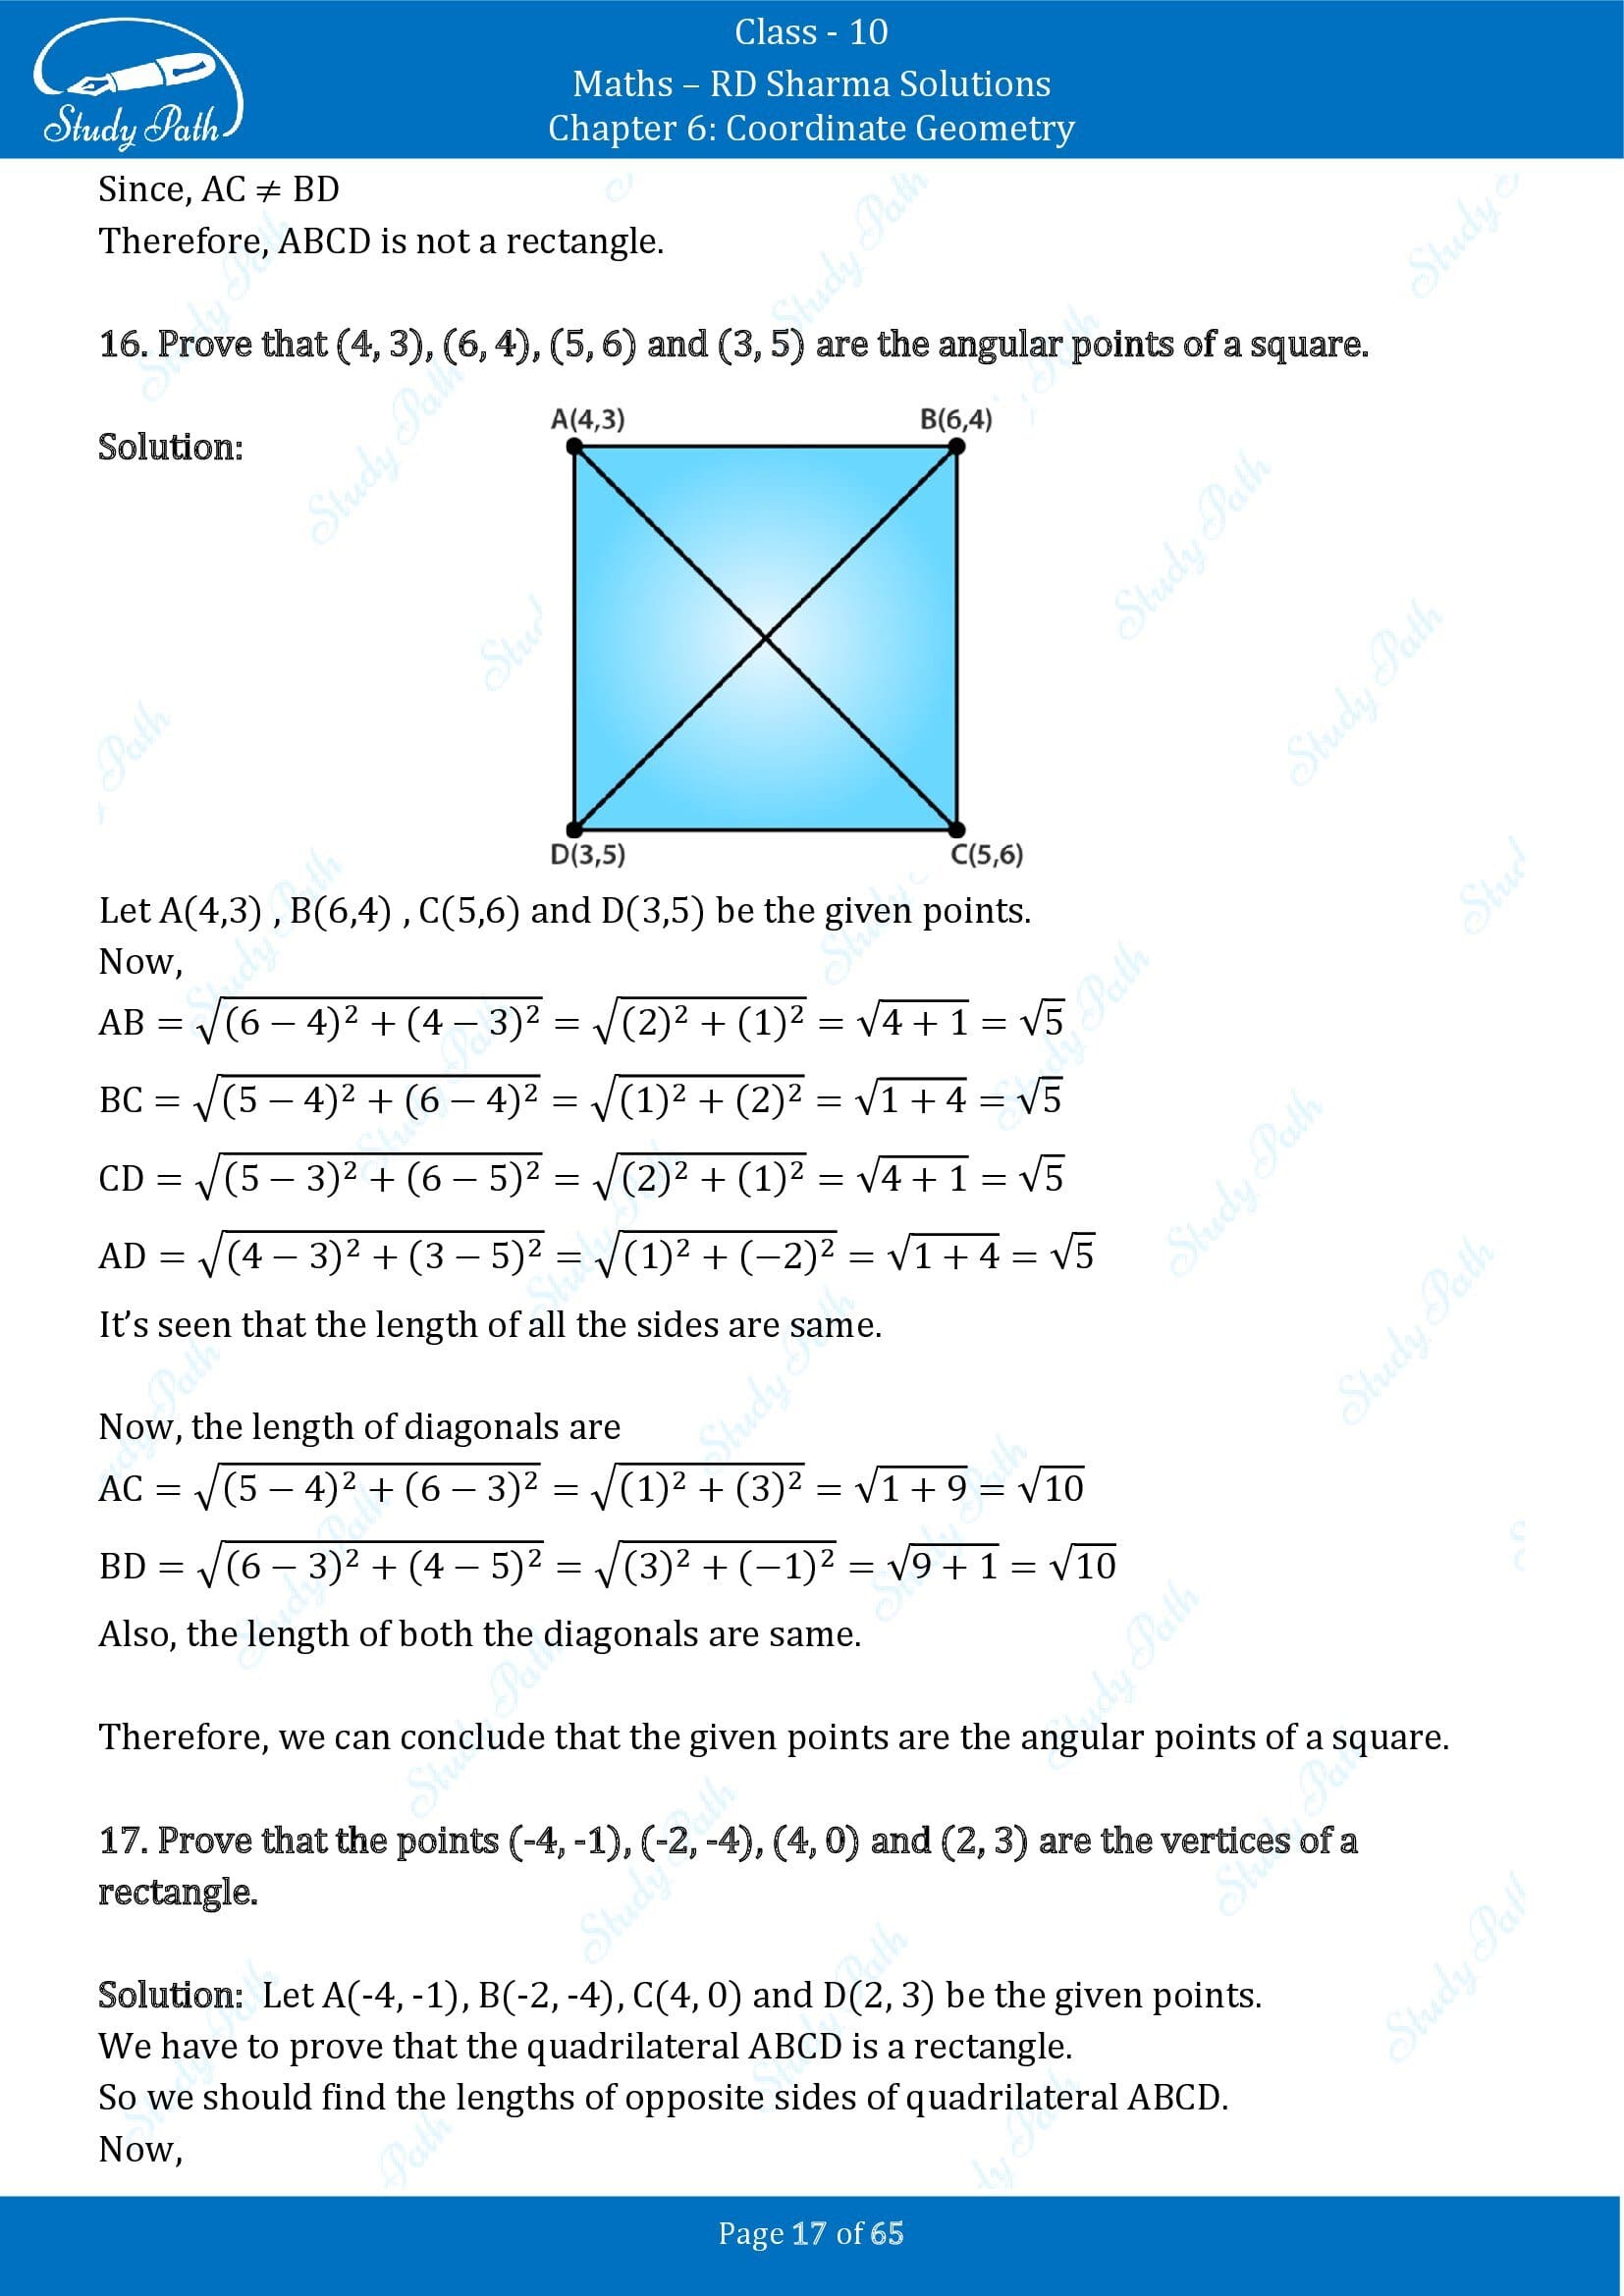 RD Sharma Solutions Class 10 Chapter 6 Coordinate Geometry Exercise 6.3 00017